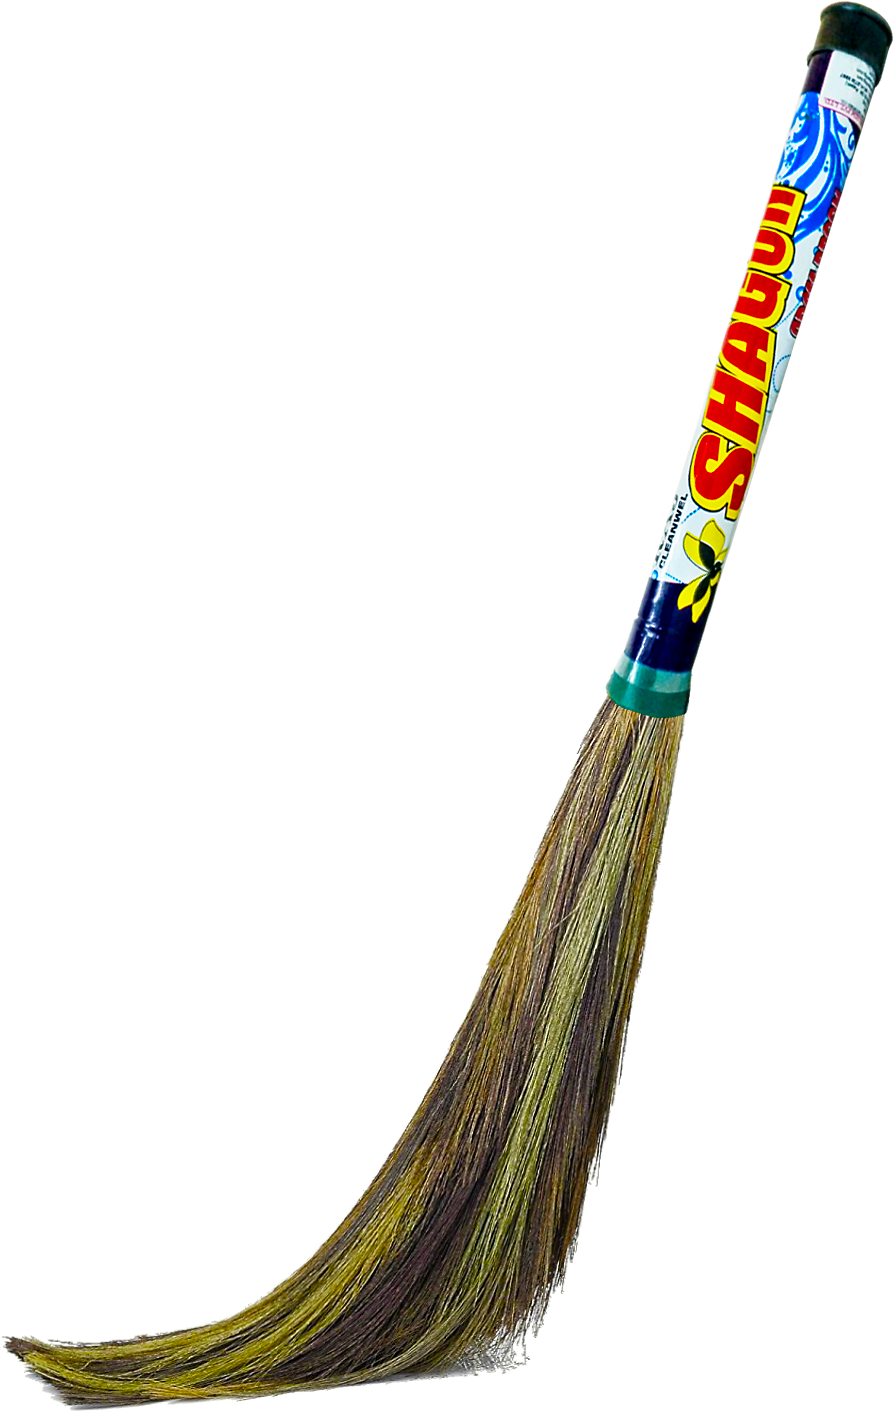 Related Indian Broom Clipart - Broom (1500x1500)